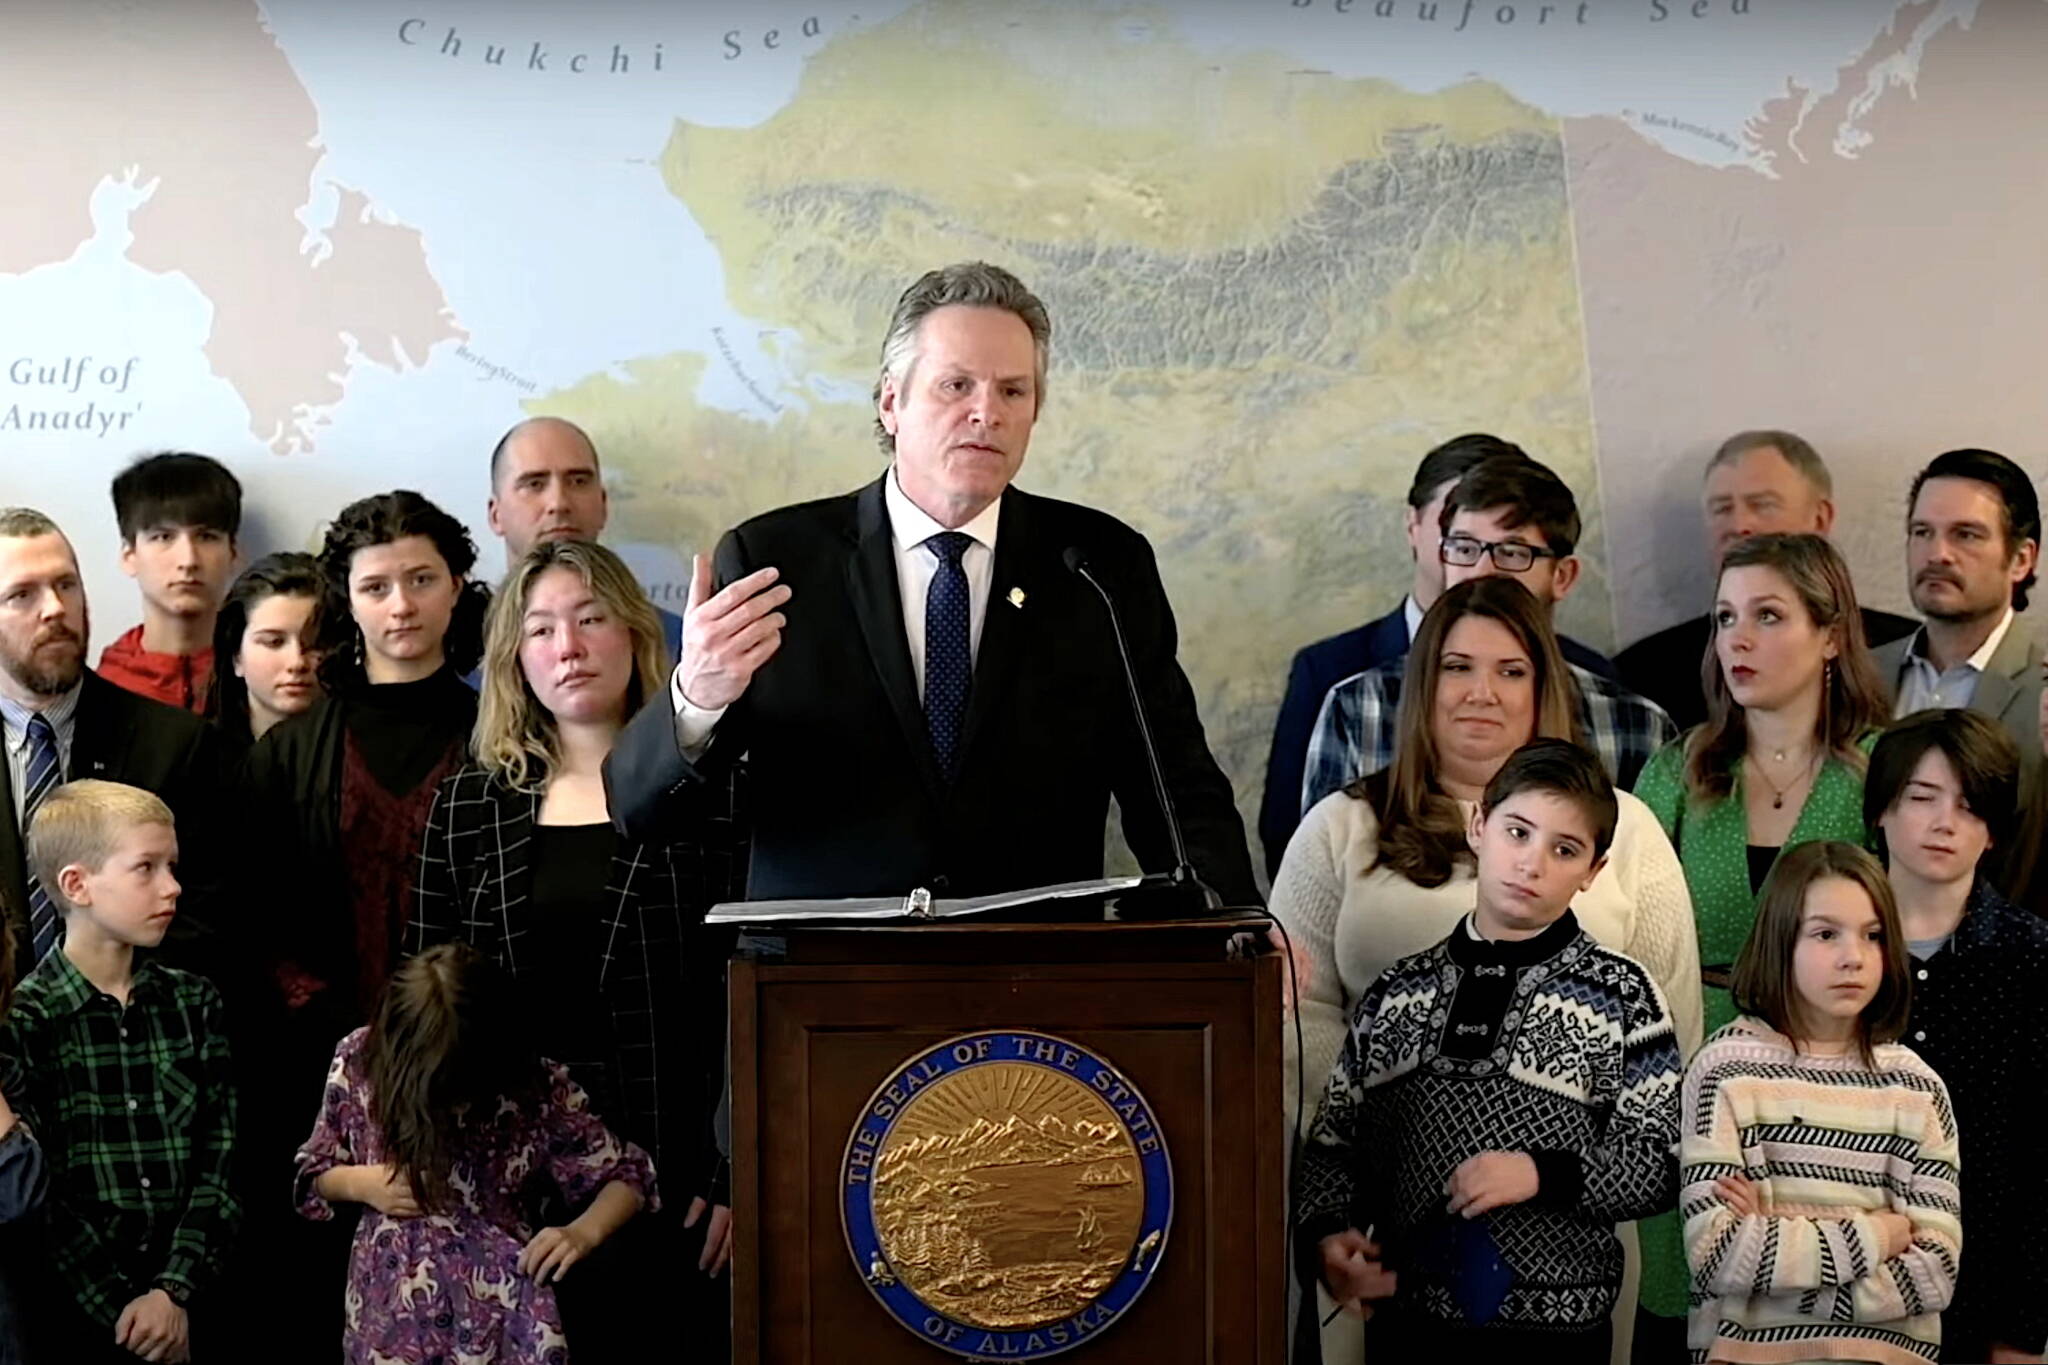 Gov. Mike Dunleavy unveils proposals to offer public school teachers annual retention bonuses and enact policies similar so-called “don’t say gay” laws in states such as Florida during a press conference in Anchorage on Tuesday, March 7, 2023. (Screenshot from official livestream)